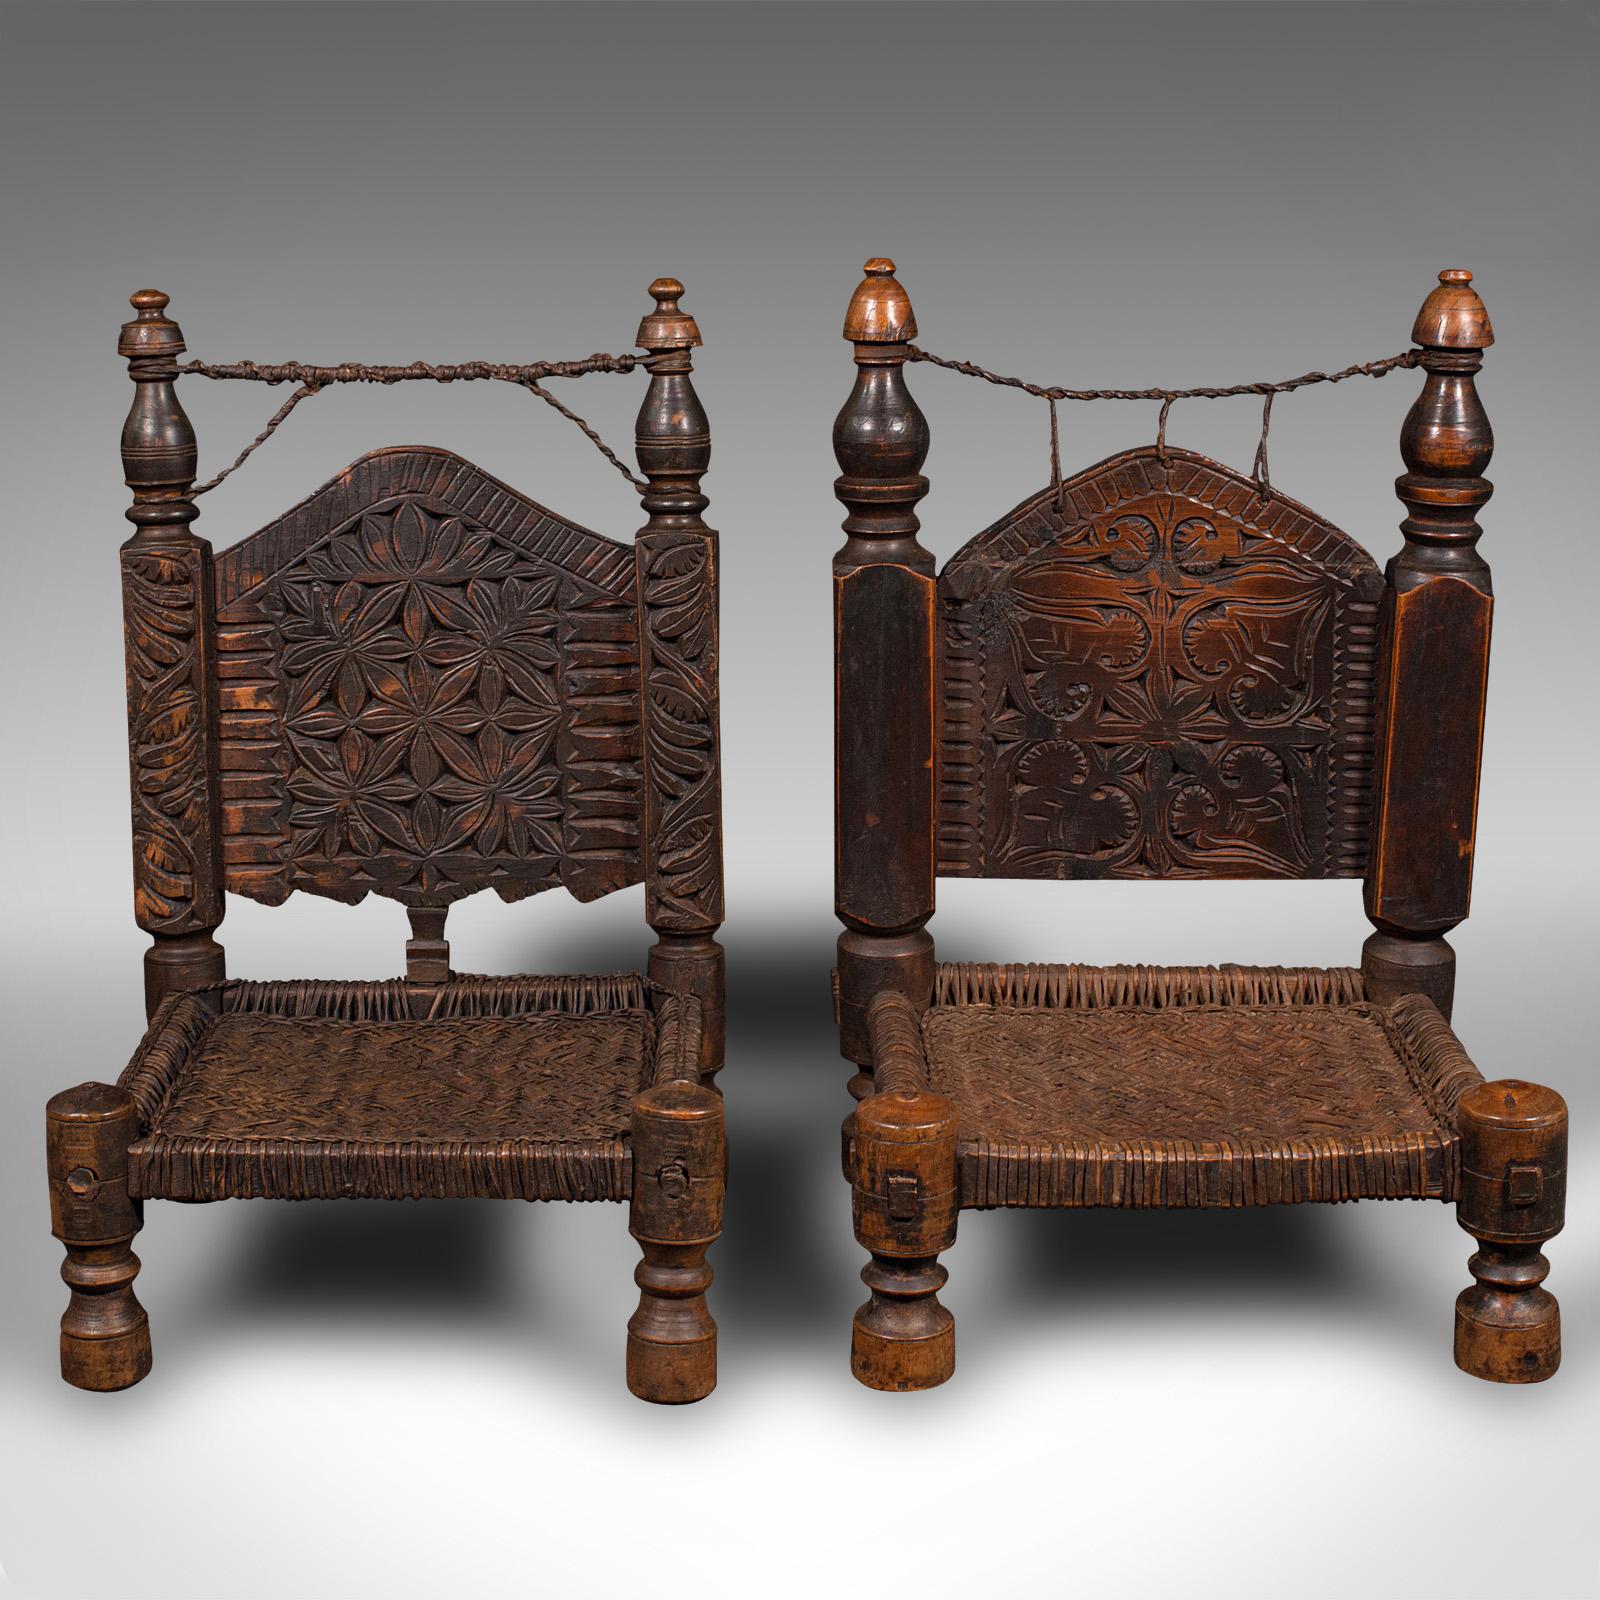 This is a near pair of antique carved temple chairs. A Burmese, mahogany and woven leather low chair, dating to the early Victorian period, circa 1850.

Utterly fascinating carved chairs, with distinctive low form and appealing detail
Displaying